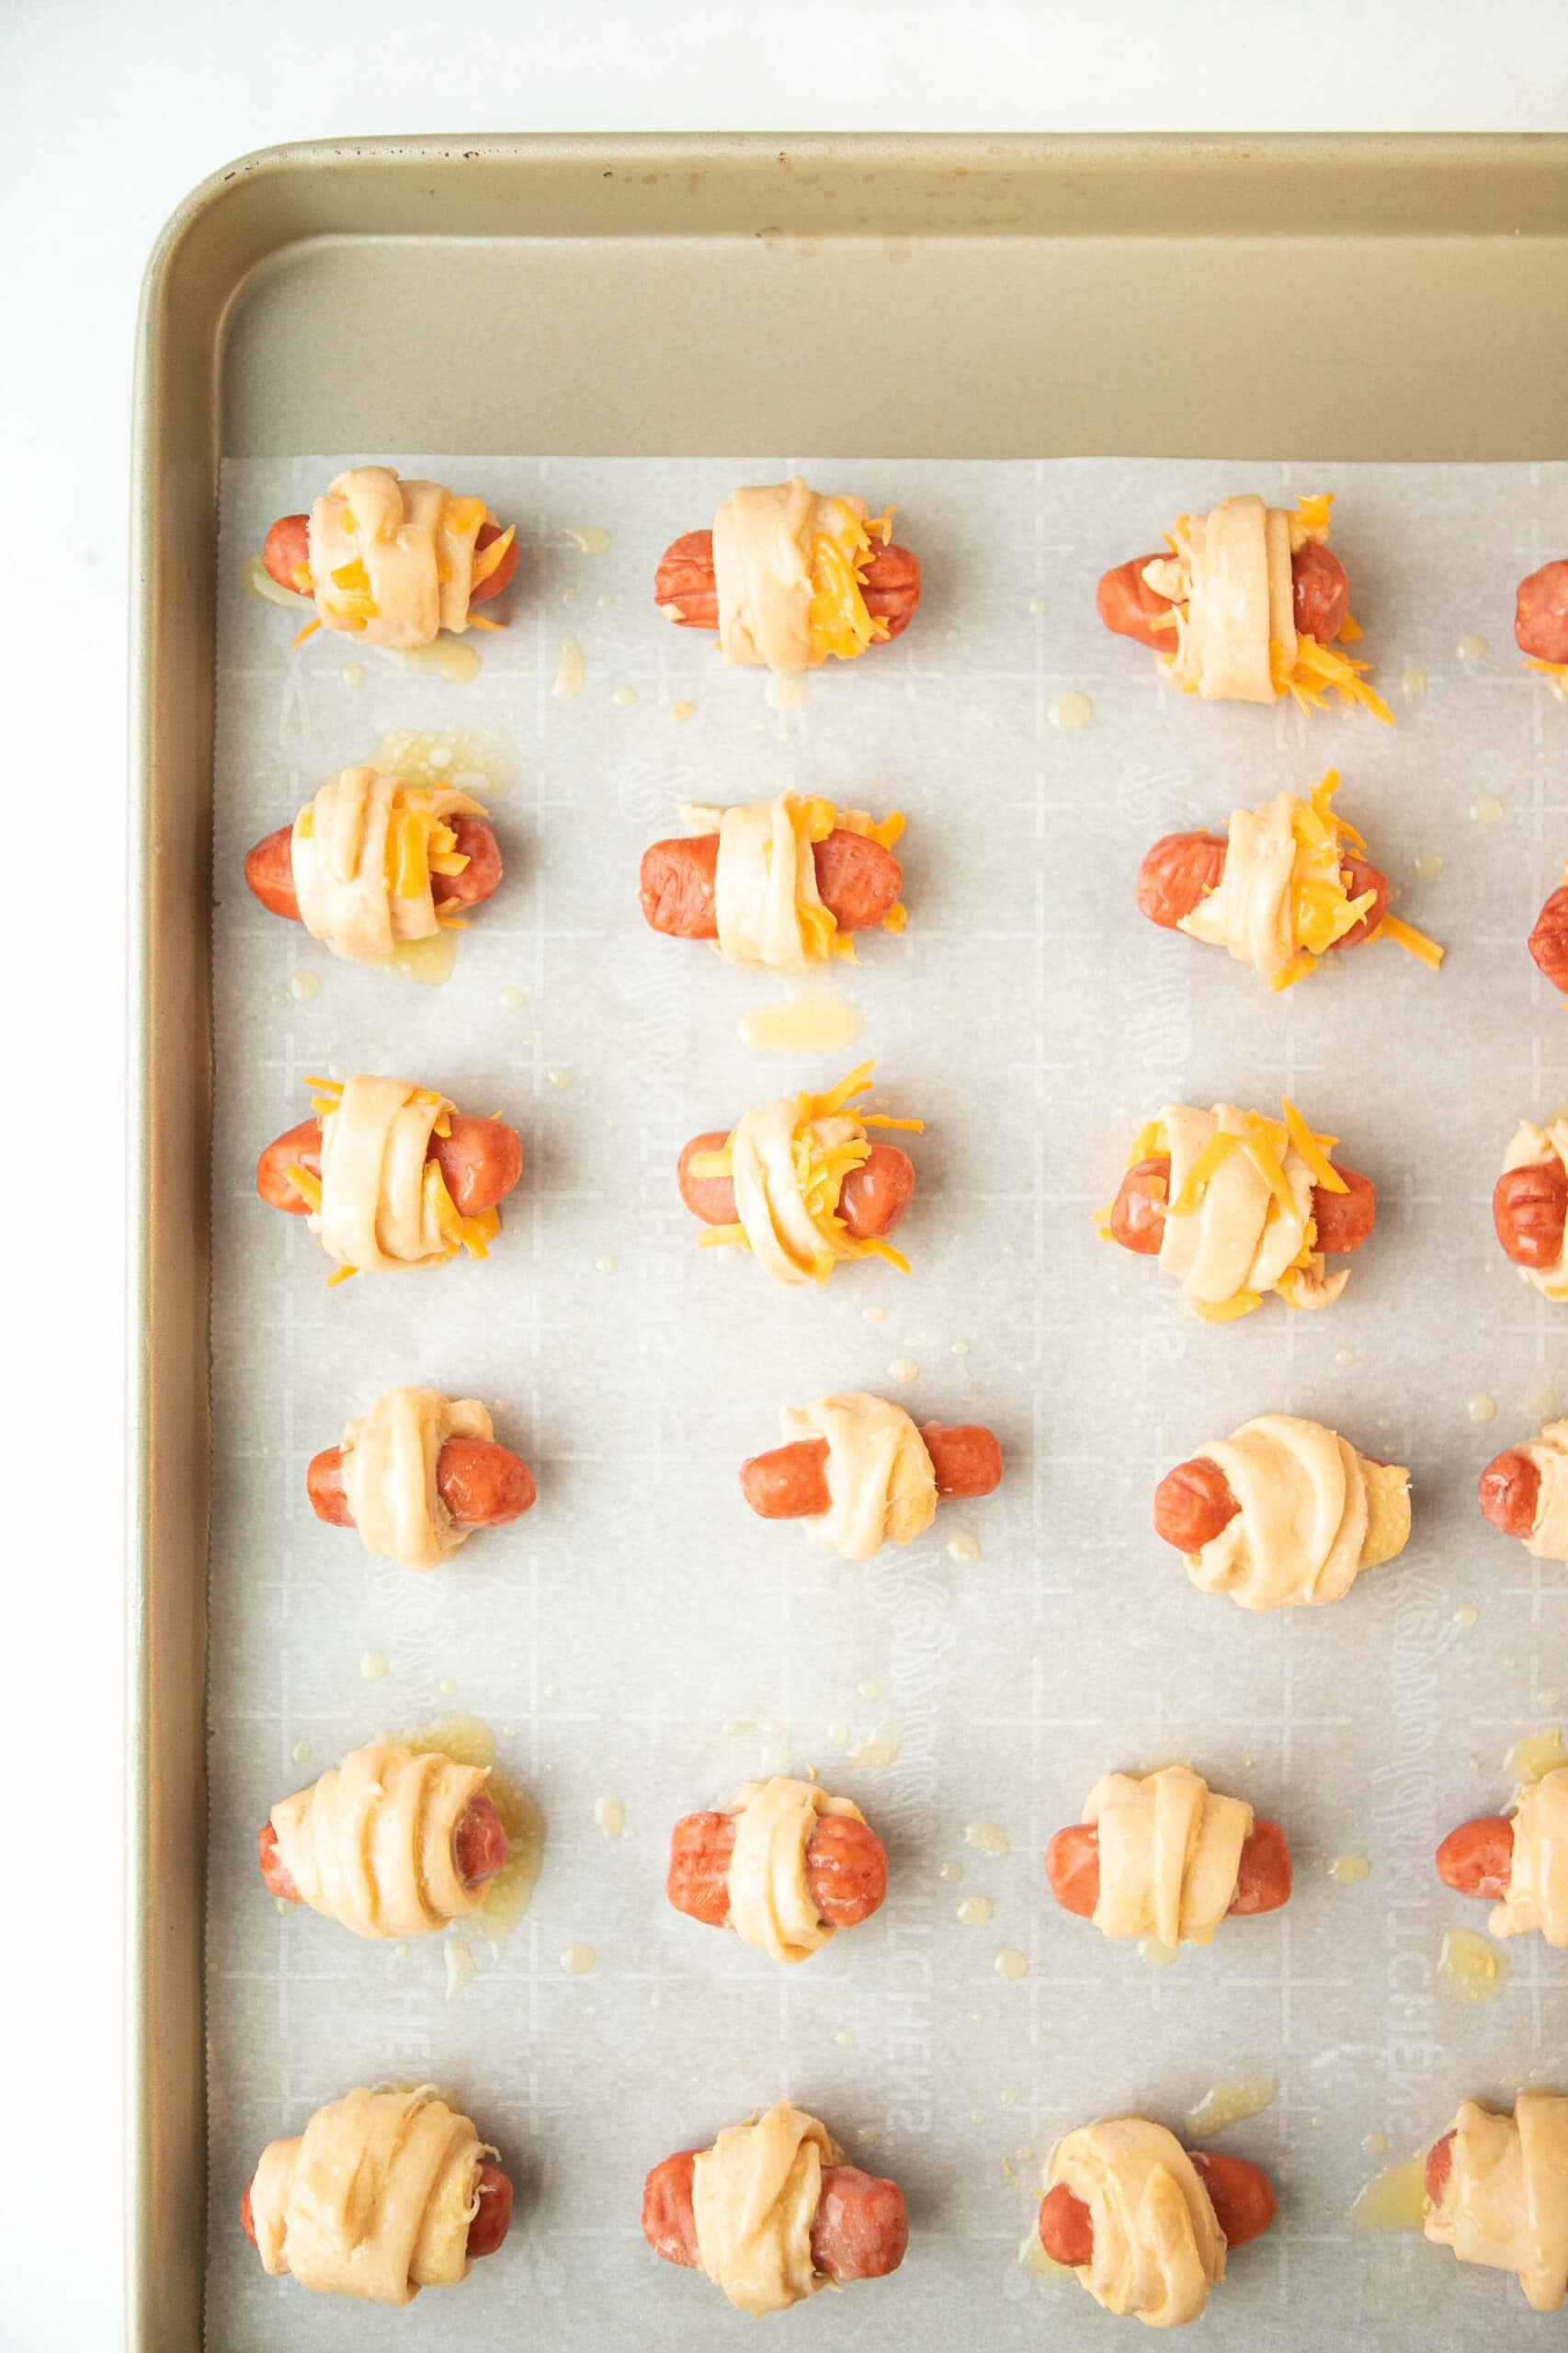 unbaked pigs in a blanket on baking sheet